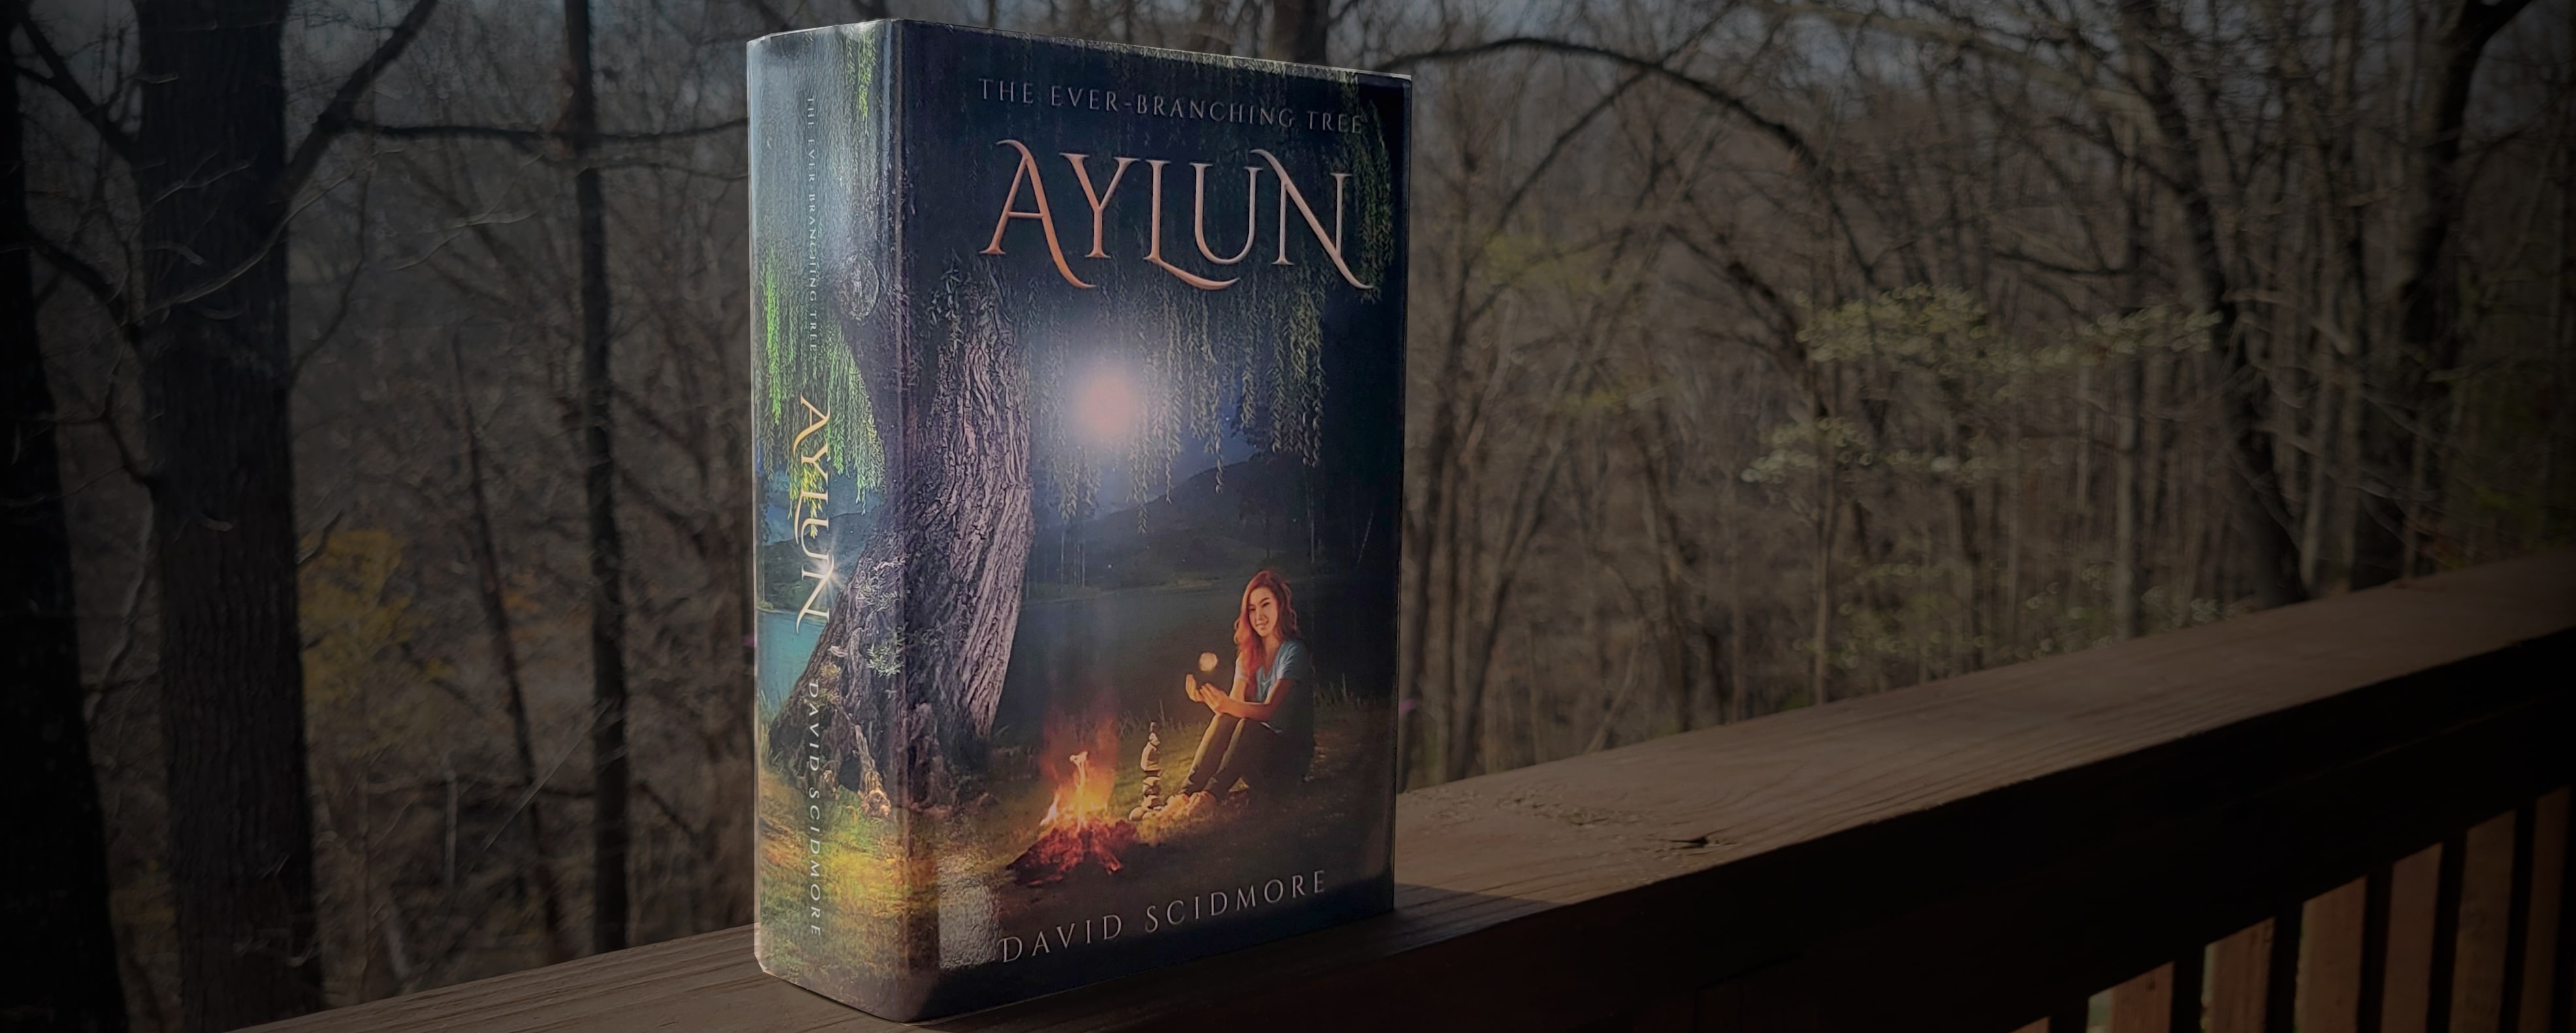 Book Cover of Aylun by David Scidmore